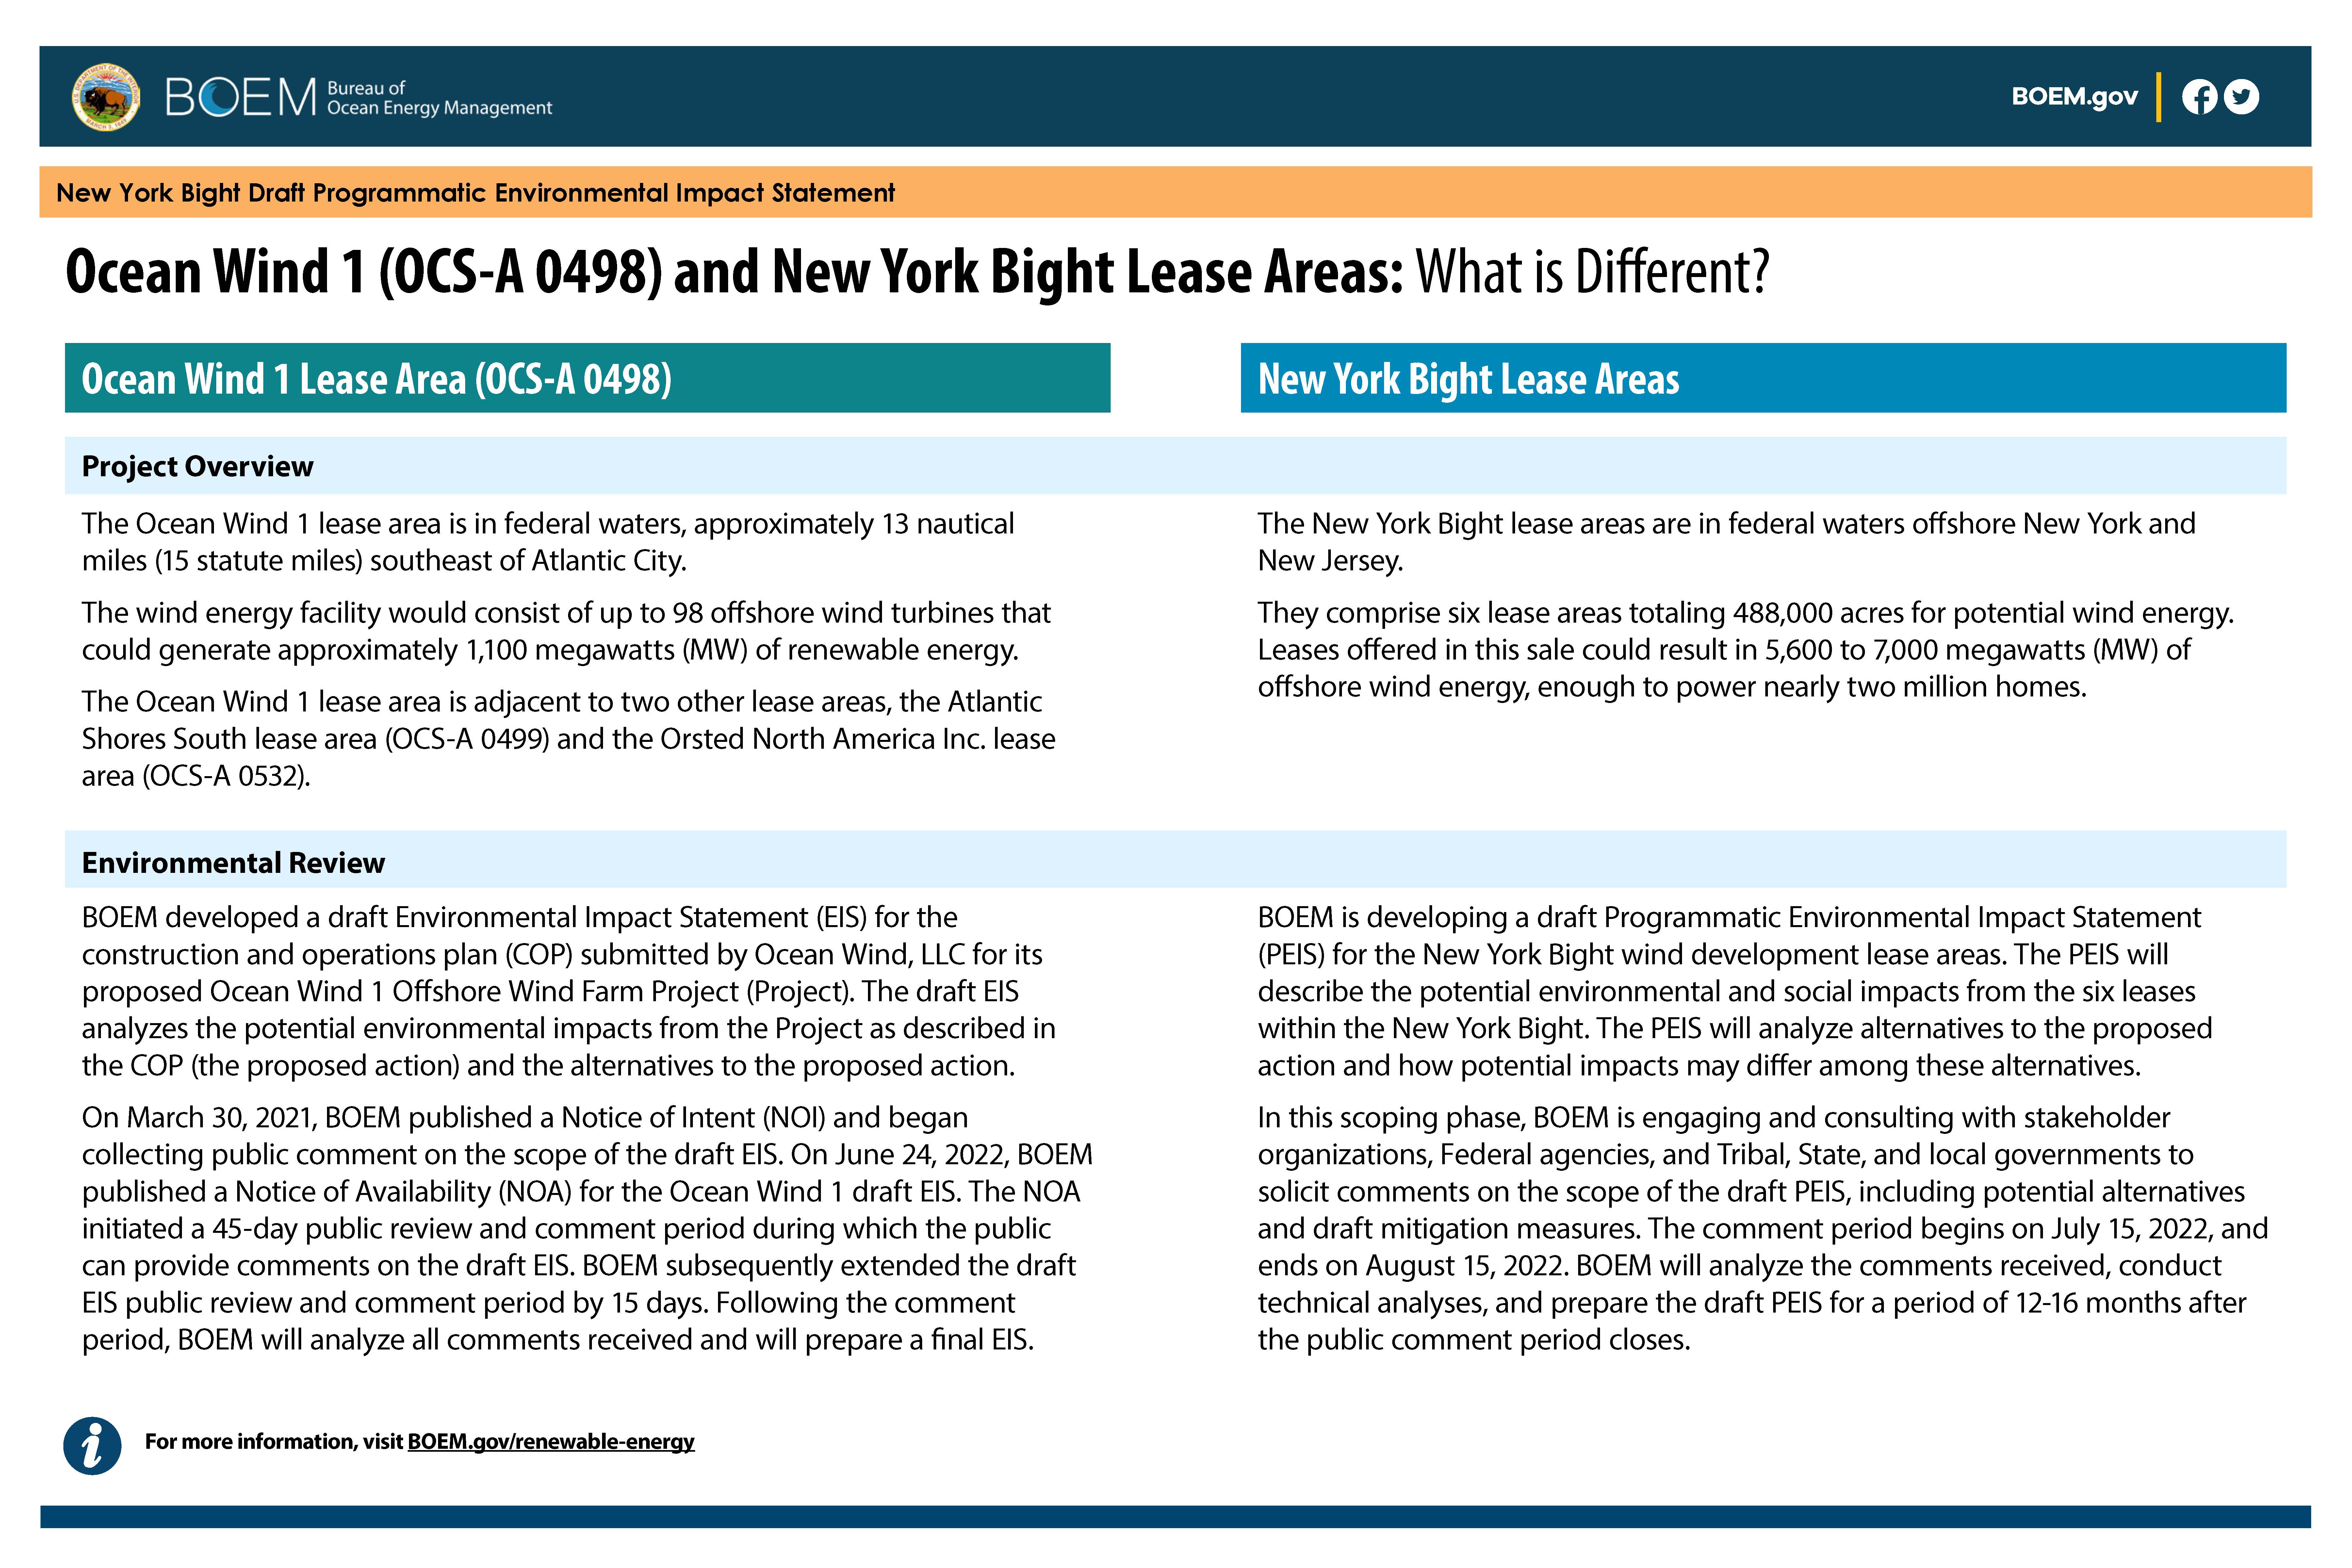 Ocean Wind 1 and the NY Bight Lease Areas